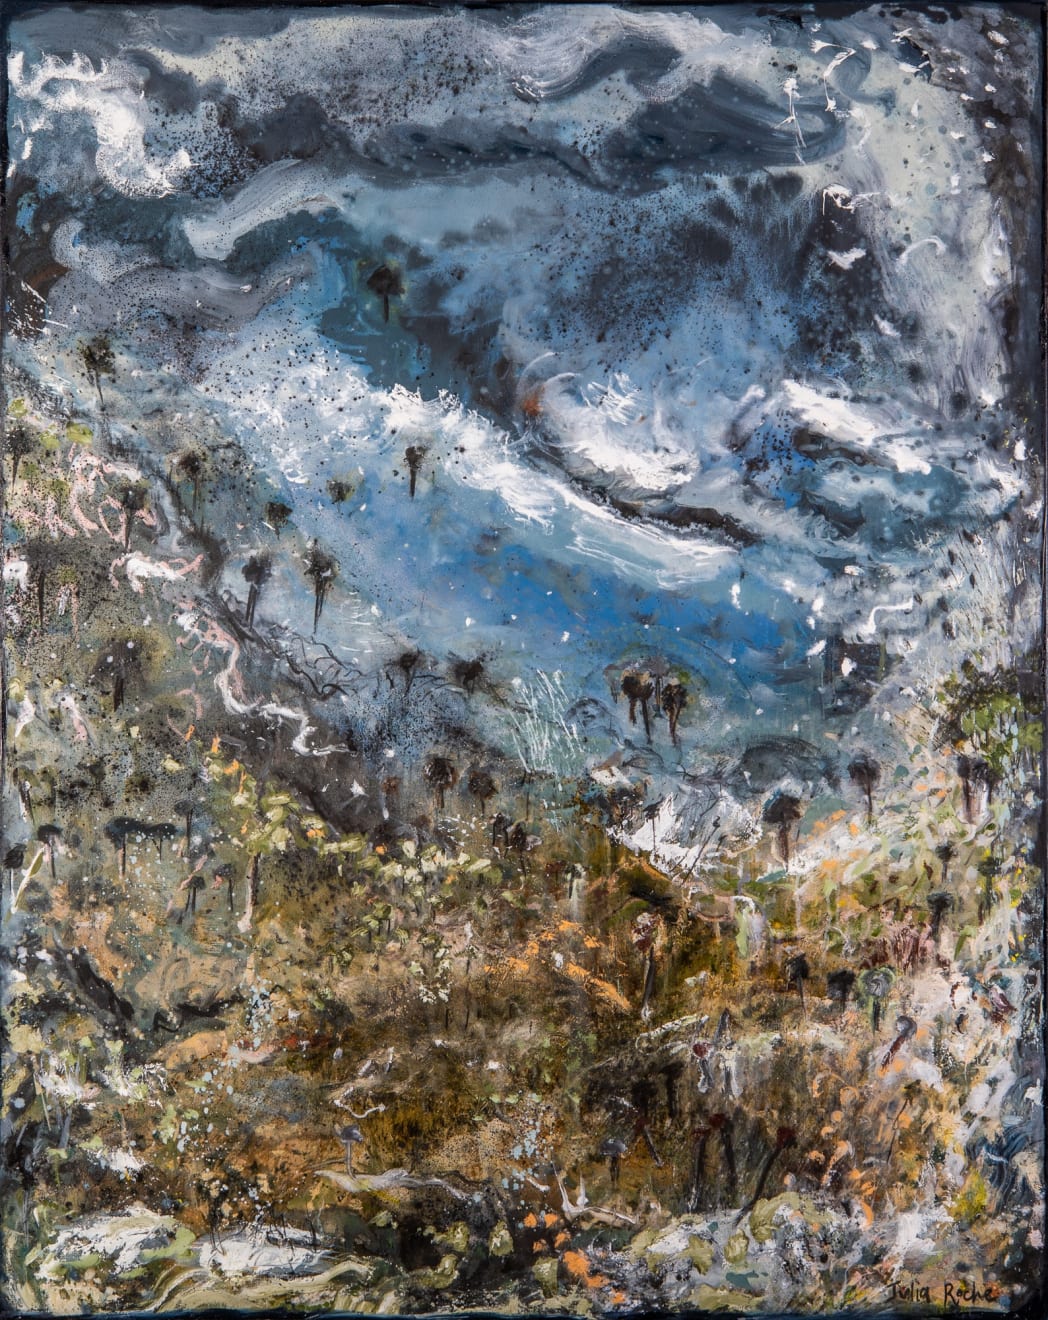 Ocean Night Oil and Mixed Media on Canvas Stretched 122 x 153 cm AUS $4950 GBP £2465 USD $3305 SOLD